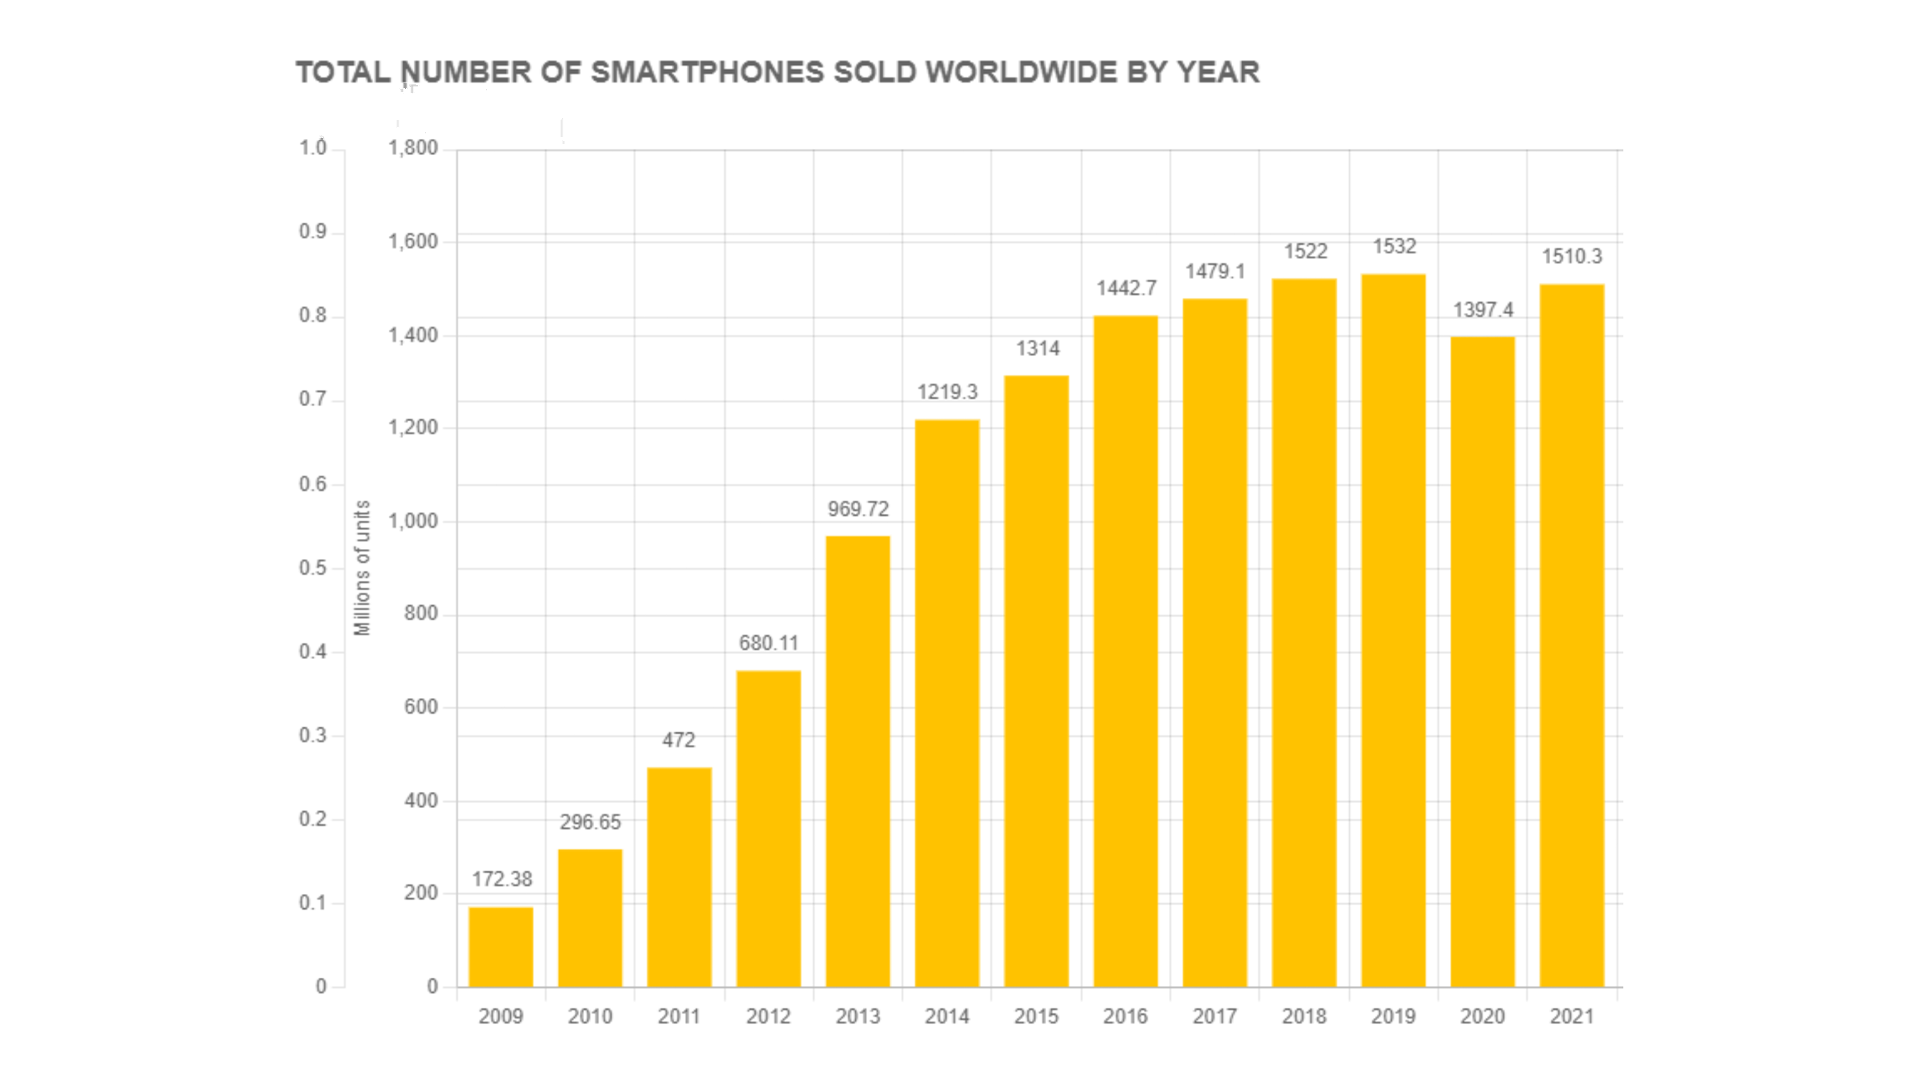 Total number of smartphones sold worldwide from 2009 to 2021